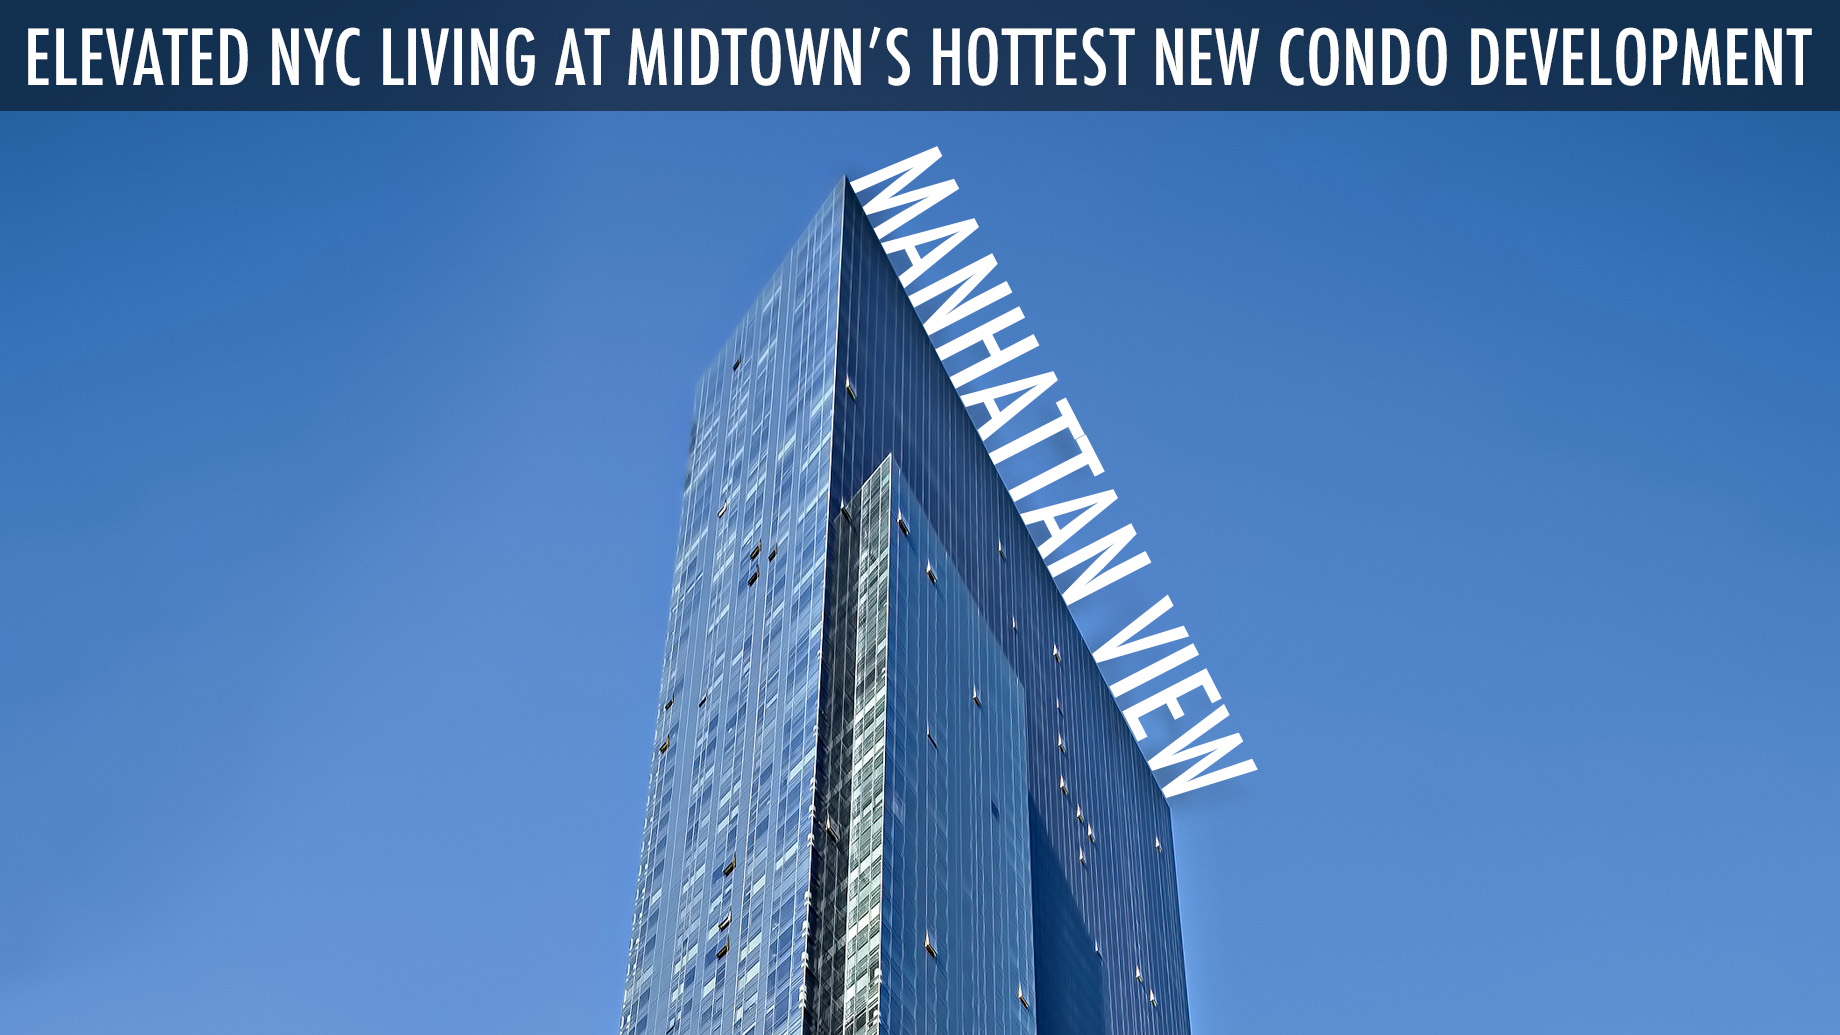 Manhattan View – Elevated NYC Living at Midtown’s Hottest New Condo Development